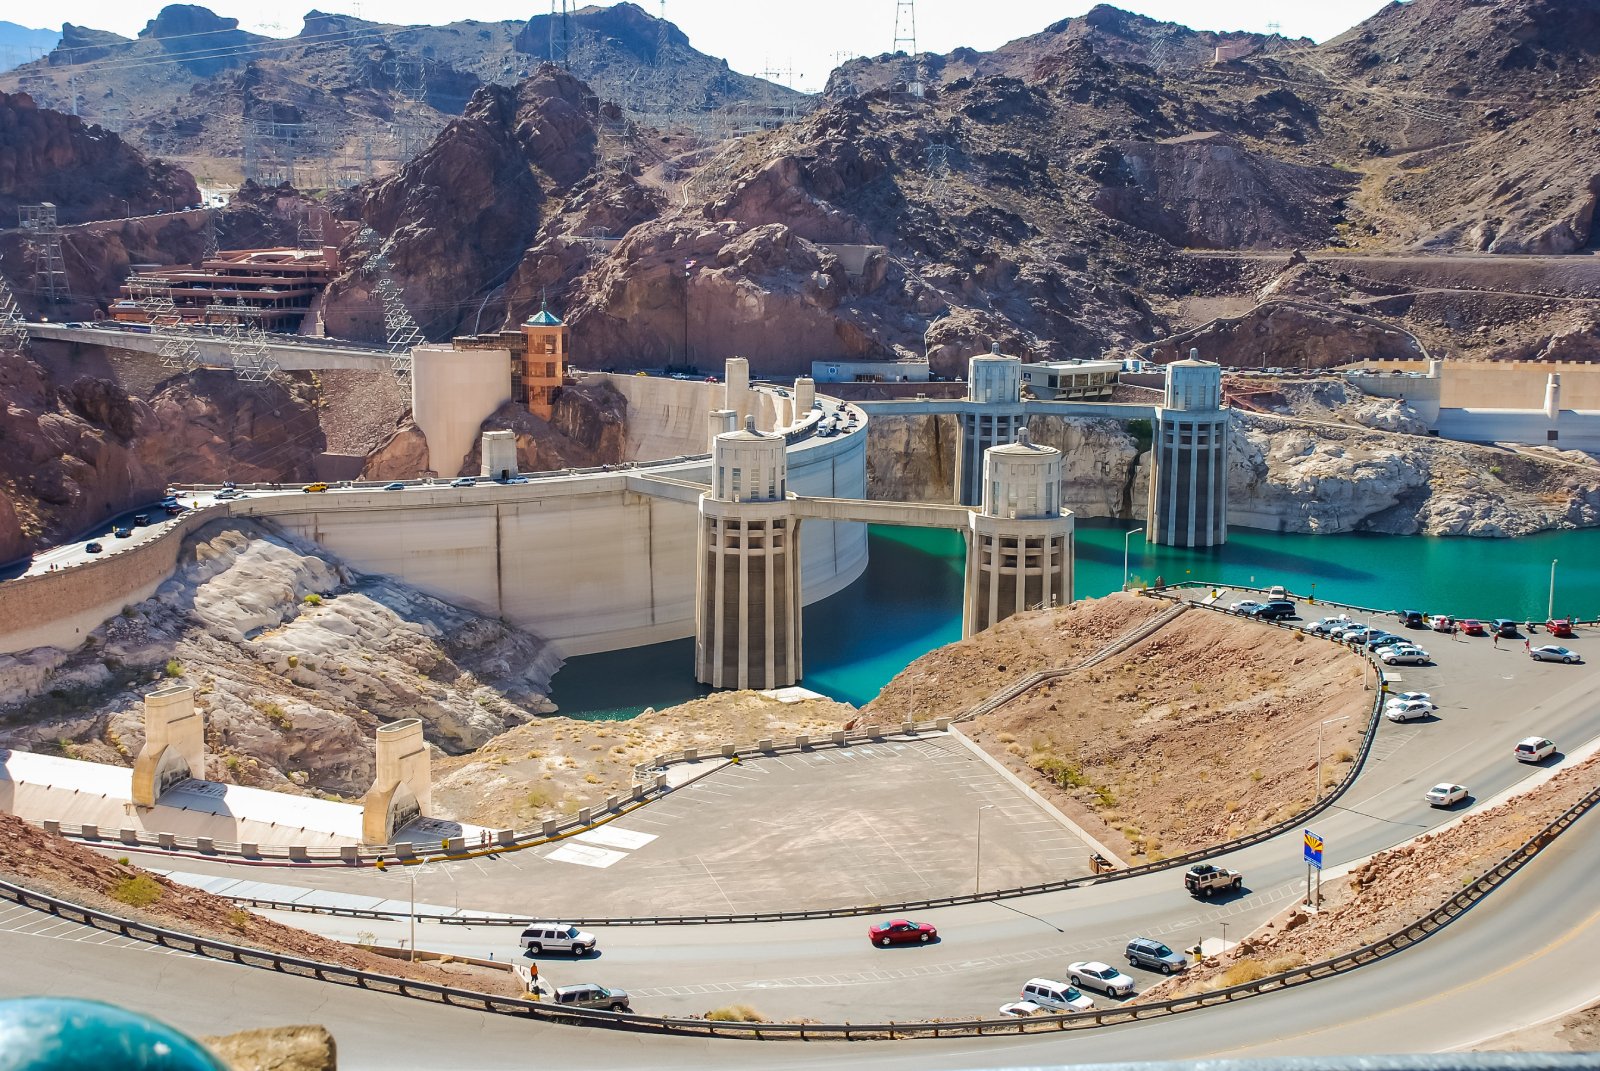 <p class="wp-caption-text">Image Credit: Shutterstock / Steve Buckley</p>  <p><span><strong>Depth:</strong> 532 feet</span> <span>Formed by the Hoover Dam, Lake Mead is a lifeline in the desert, offering boating, spectacular canyon views, and a gateway to the Grand Canyon.</span></p>